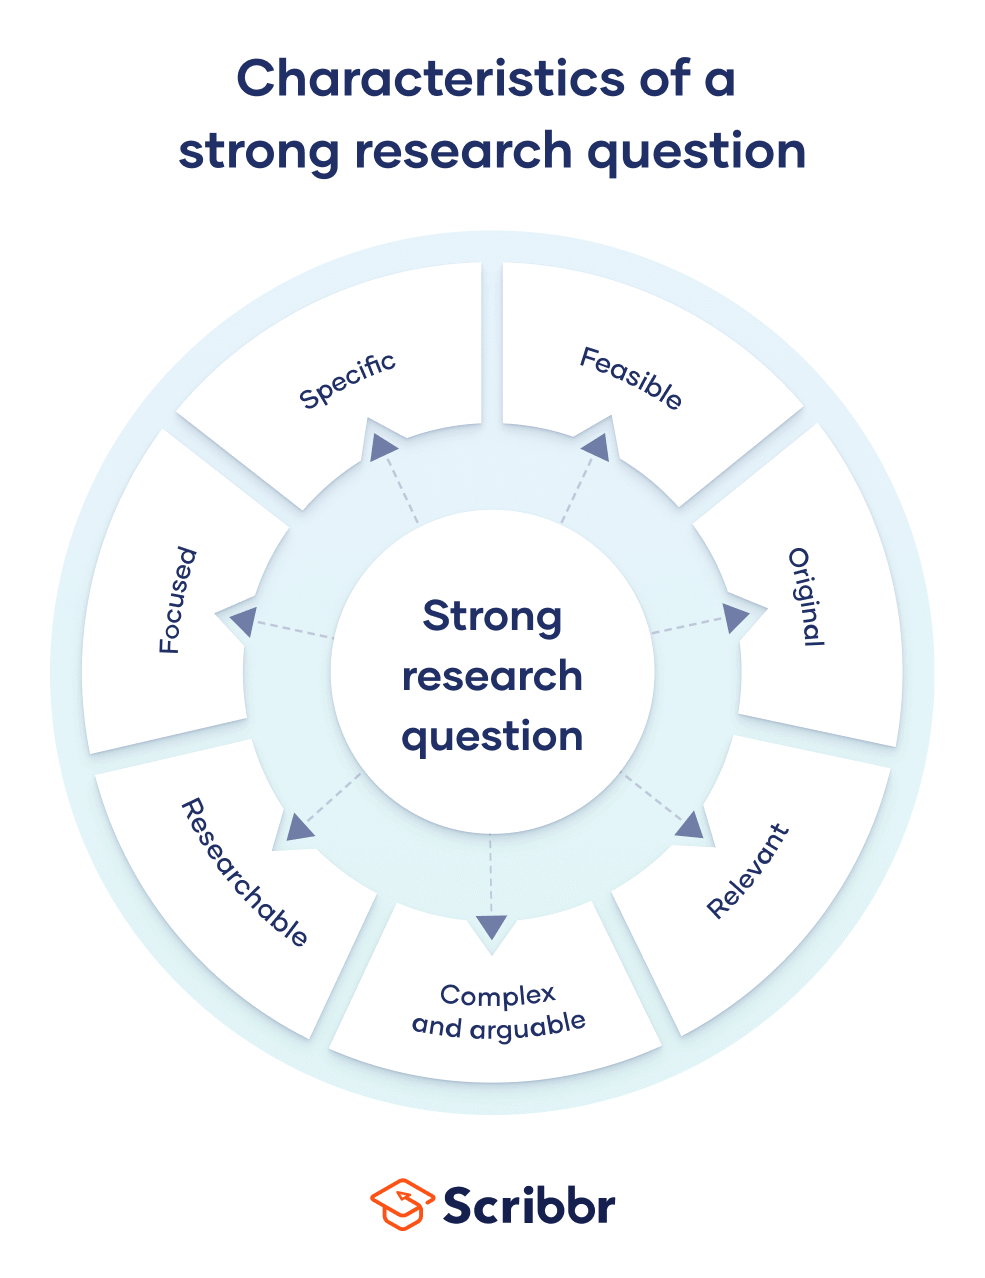 10 characteristics of a good research question